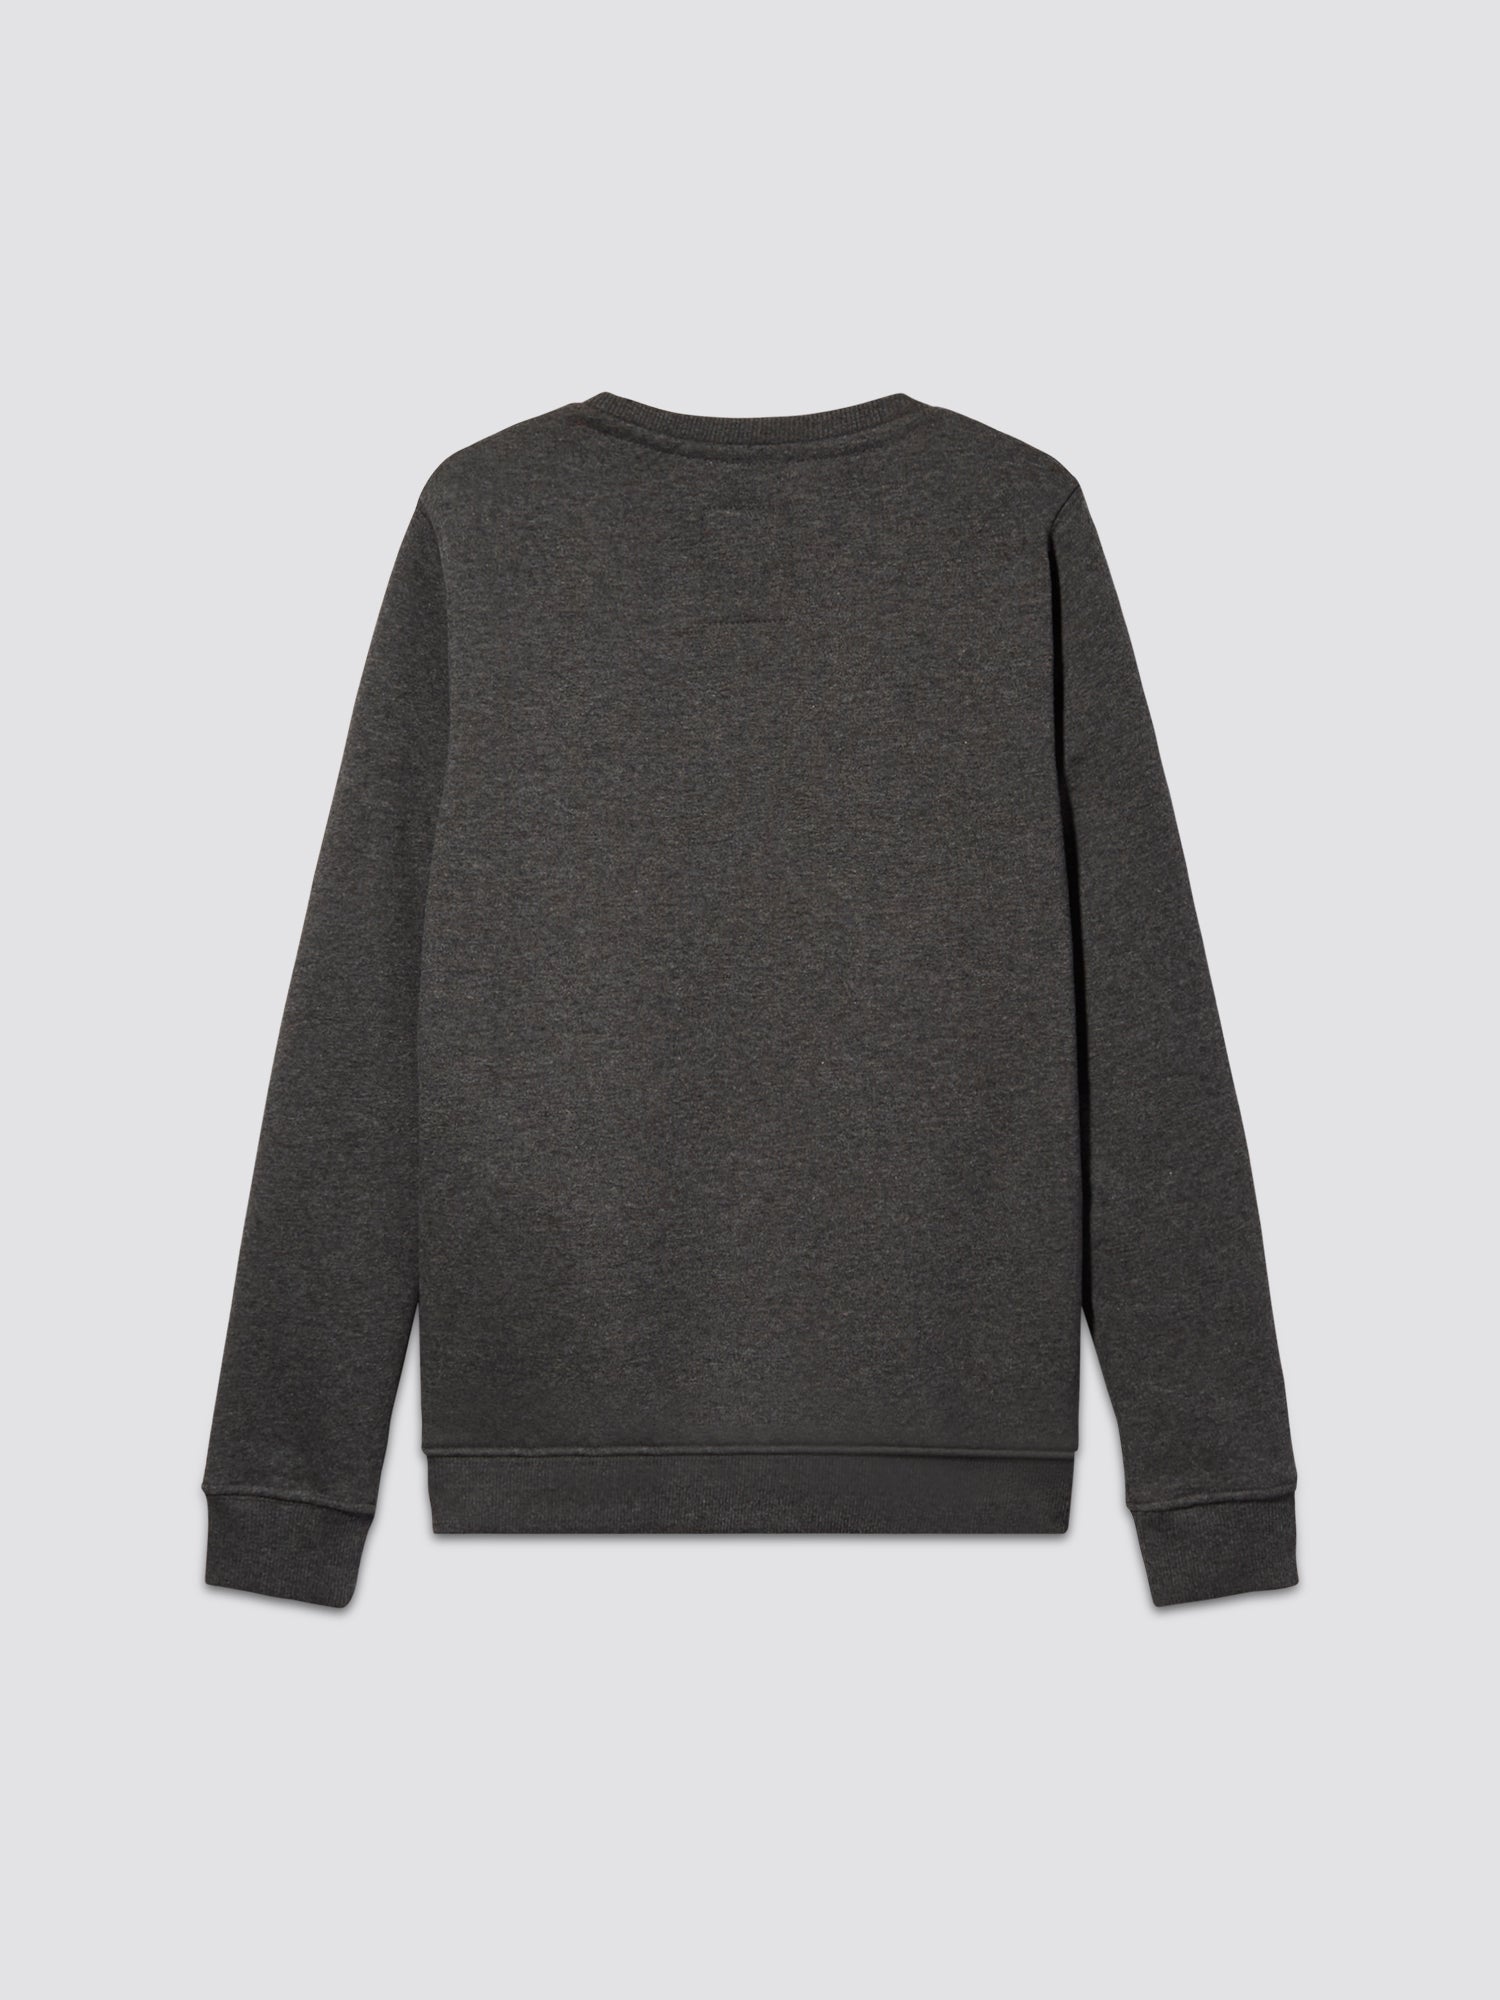 YOUTH BASIC SWEATER TOP Alpha Industries, Inc. 